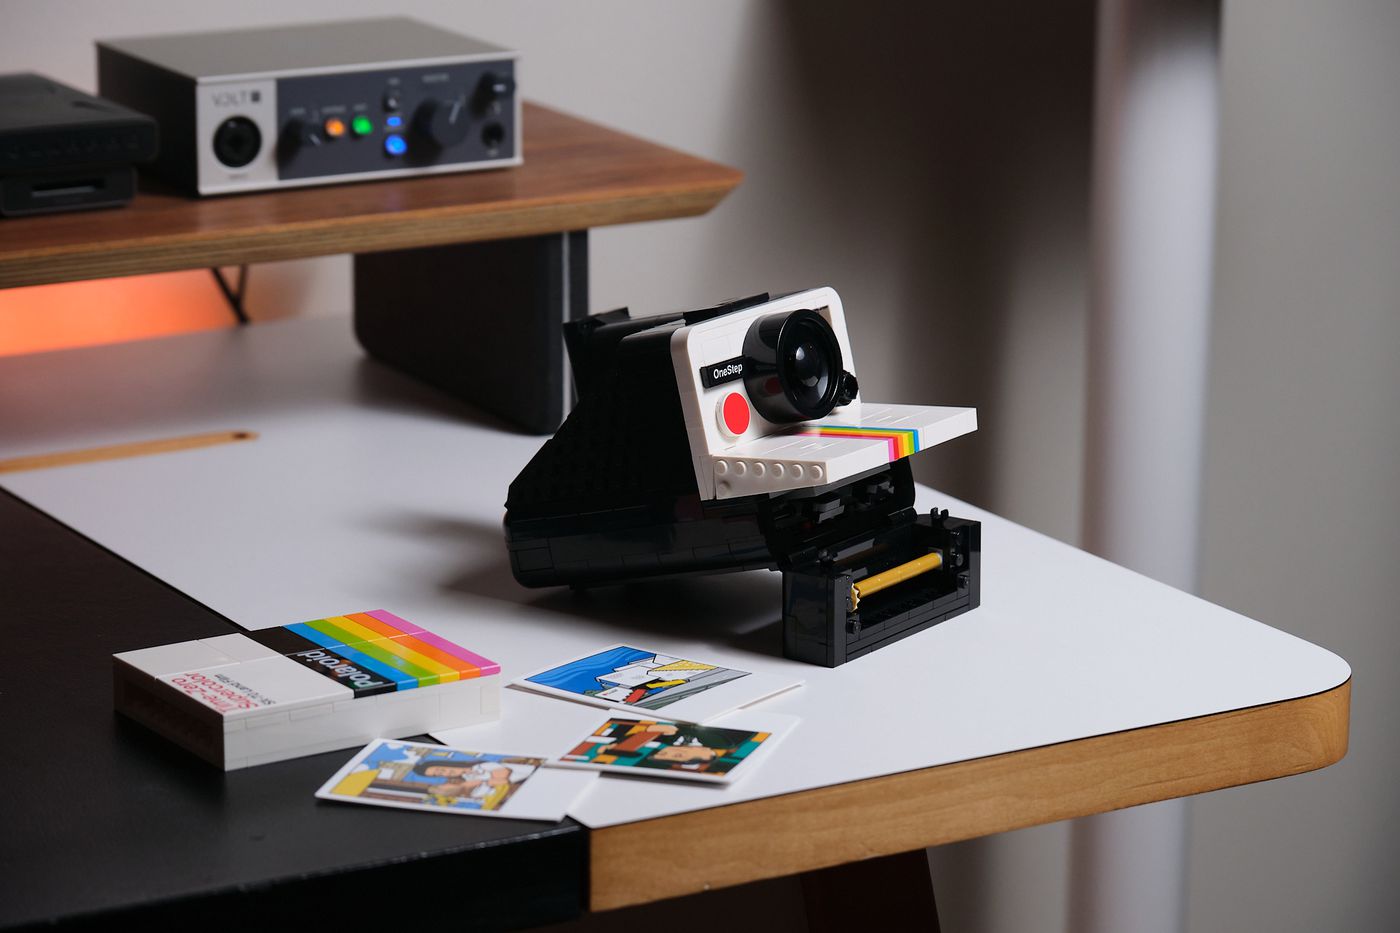 The Lego Ideas Polaroid OneStep in final prototype form, with its film bay open, sitting alongside its brick-built film box and photocards.